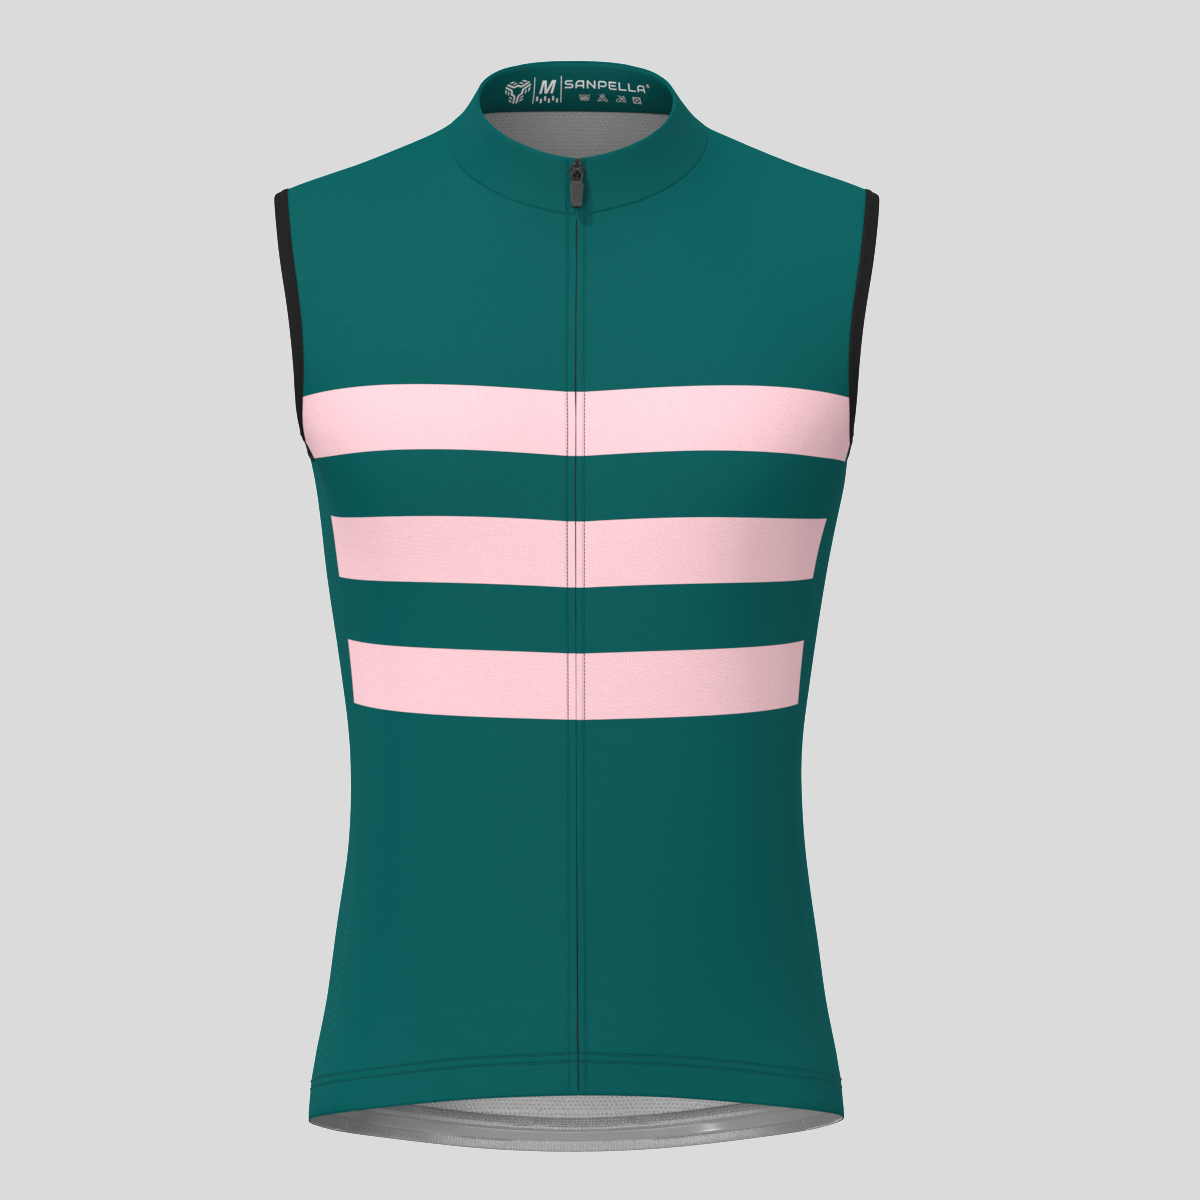 Men's Classic Stripes Sleeveless Cycling Jersey - Midnight/Pink